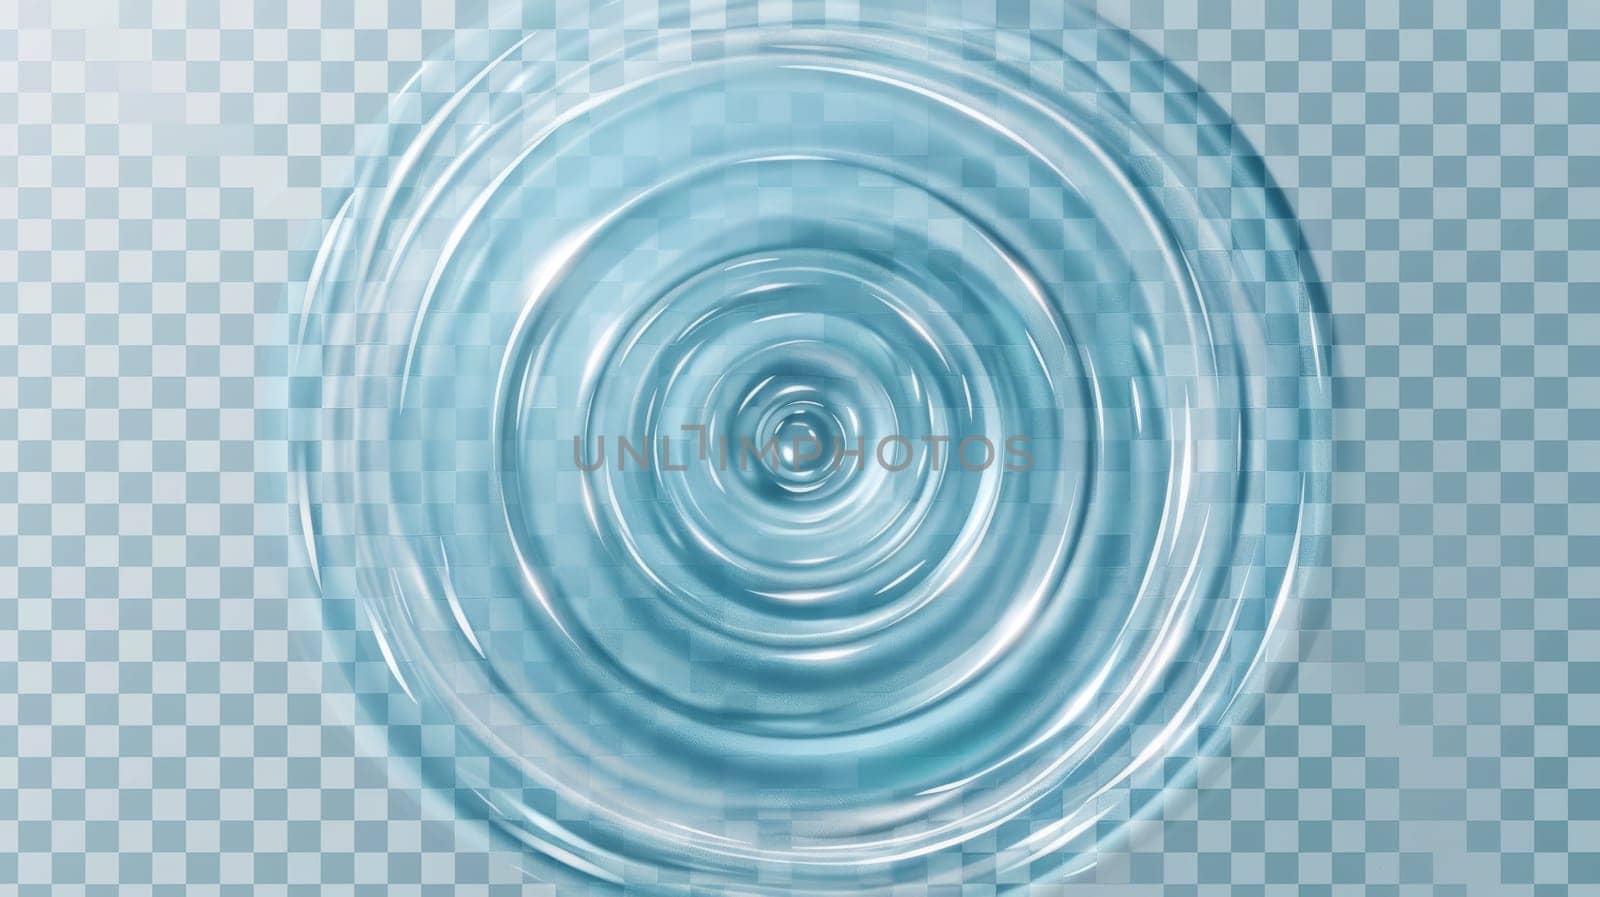 Ripple effect on clear aqua top view with circle waves isolated on transparent background. Modern realistic concentric rings on liquid surface from falling drops.